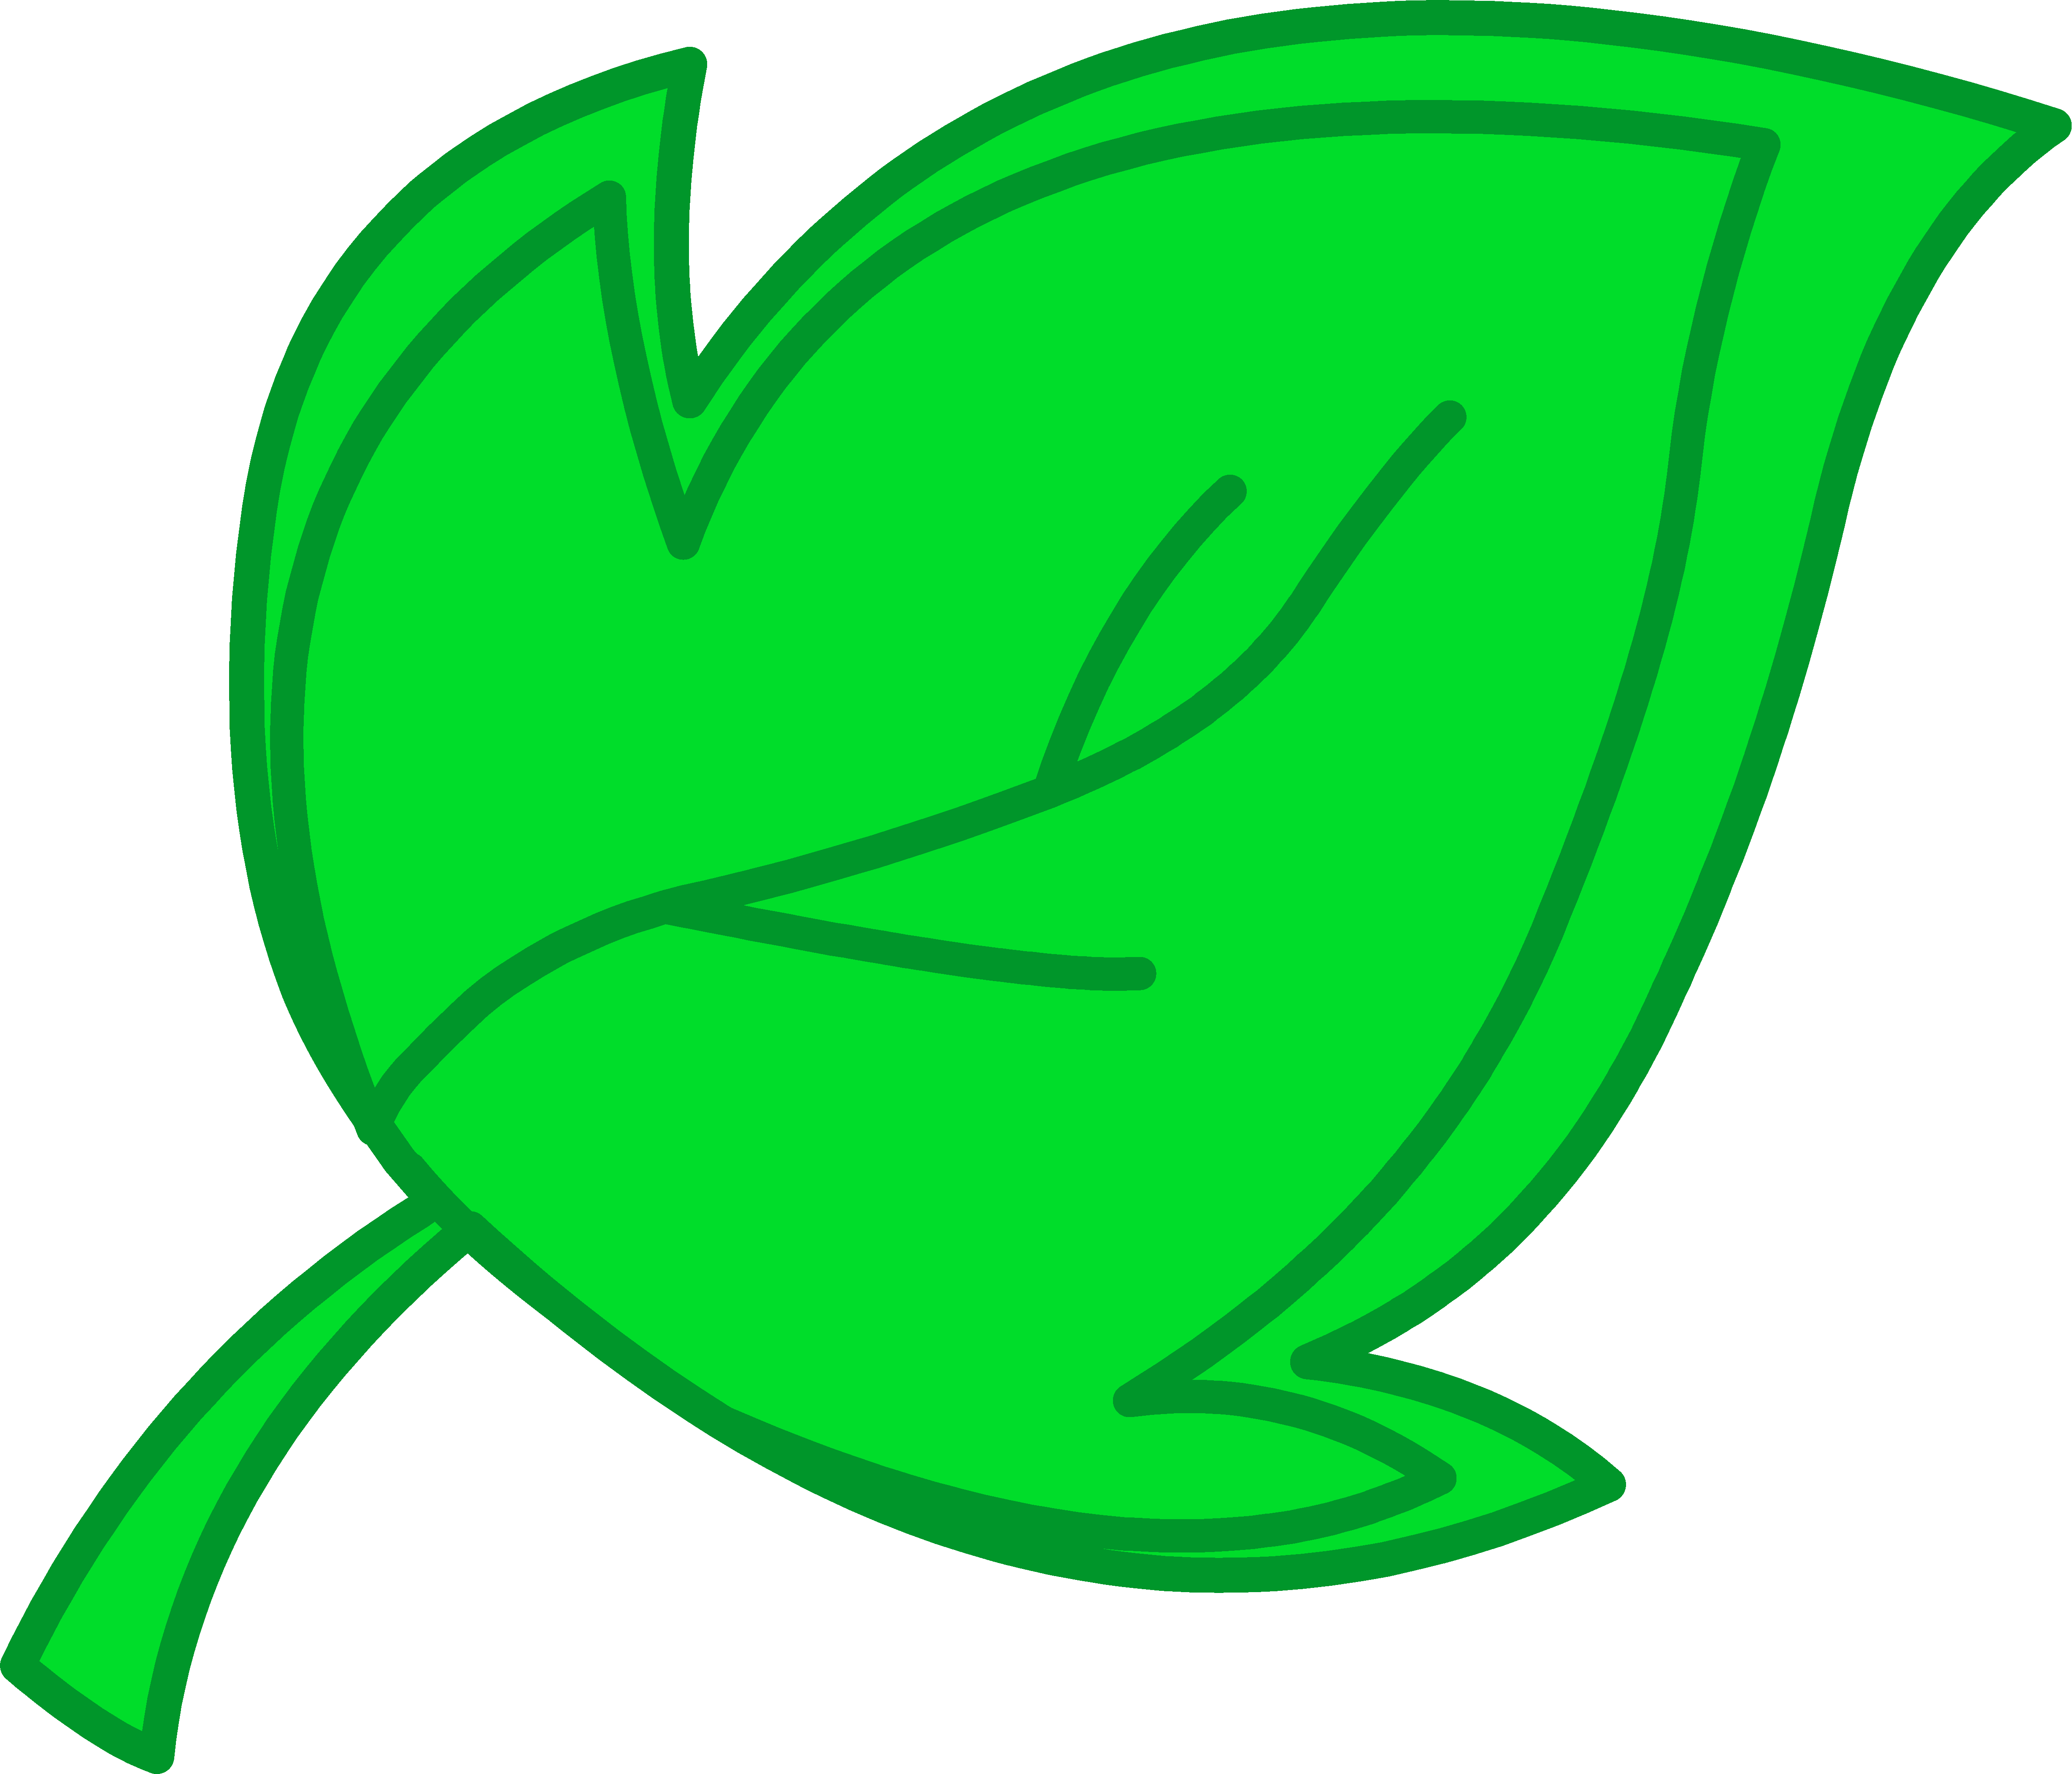 Animated clipart leafy green tree